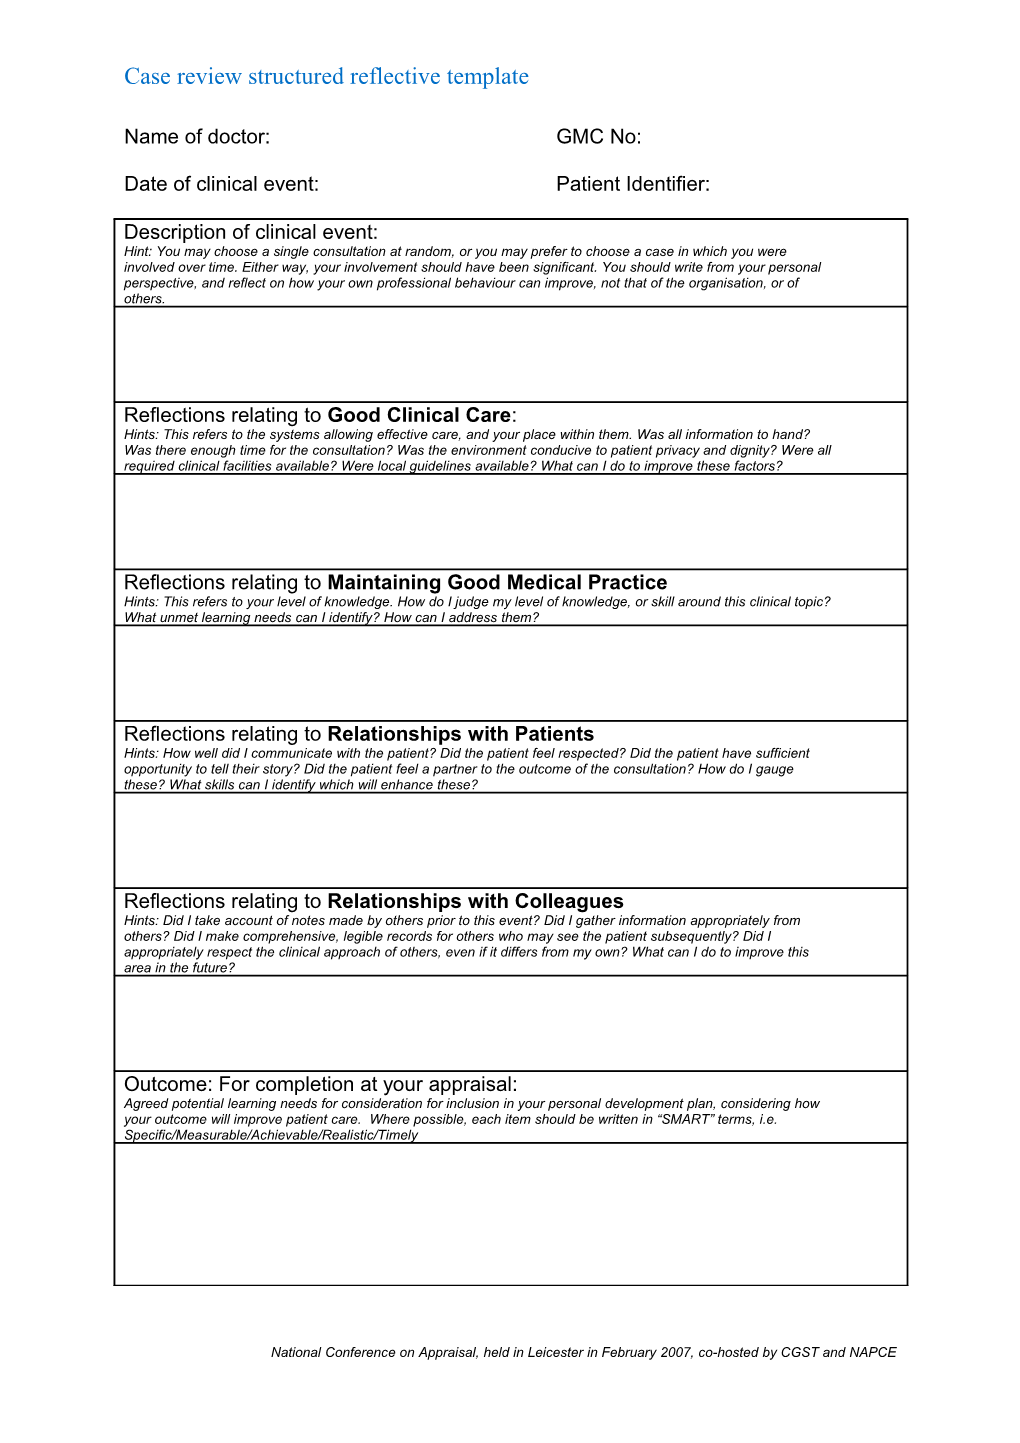 Case Review Structured Reflective Template